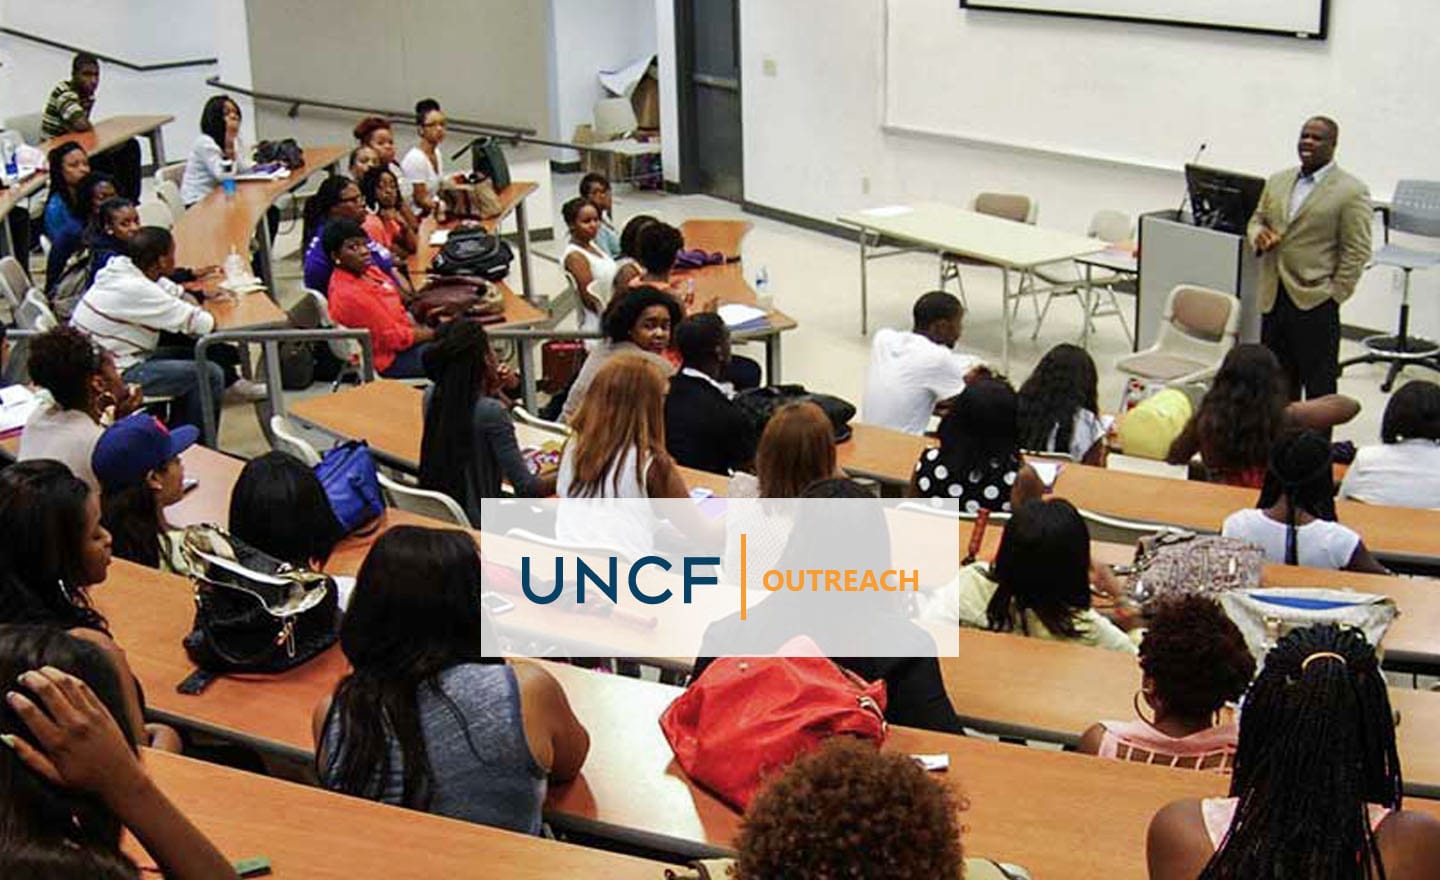 UNCF Outreach banner image